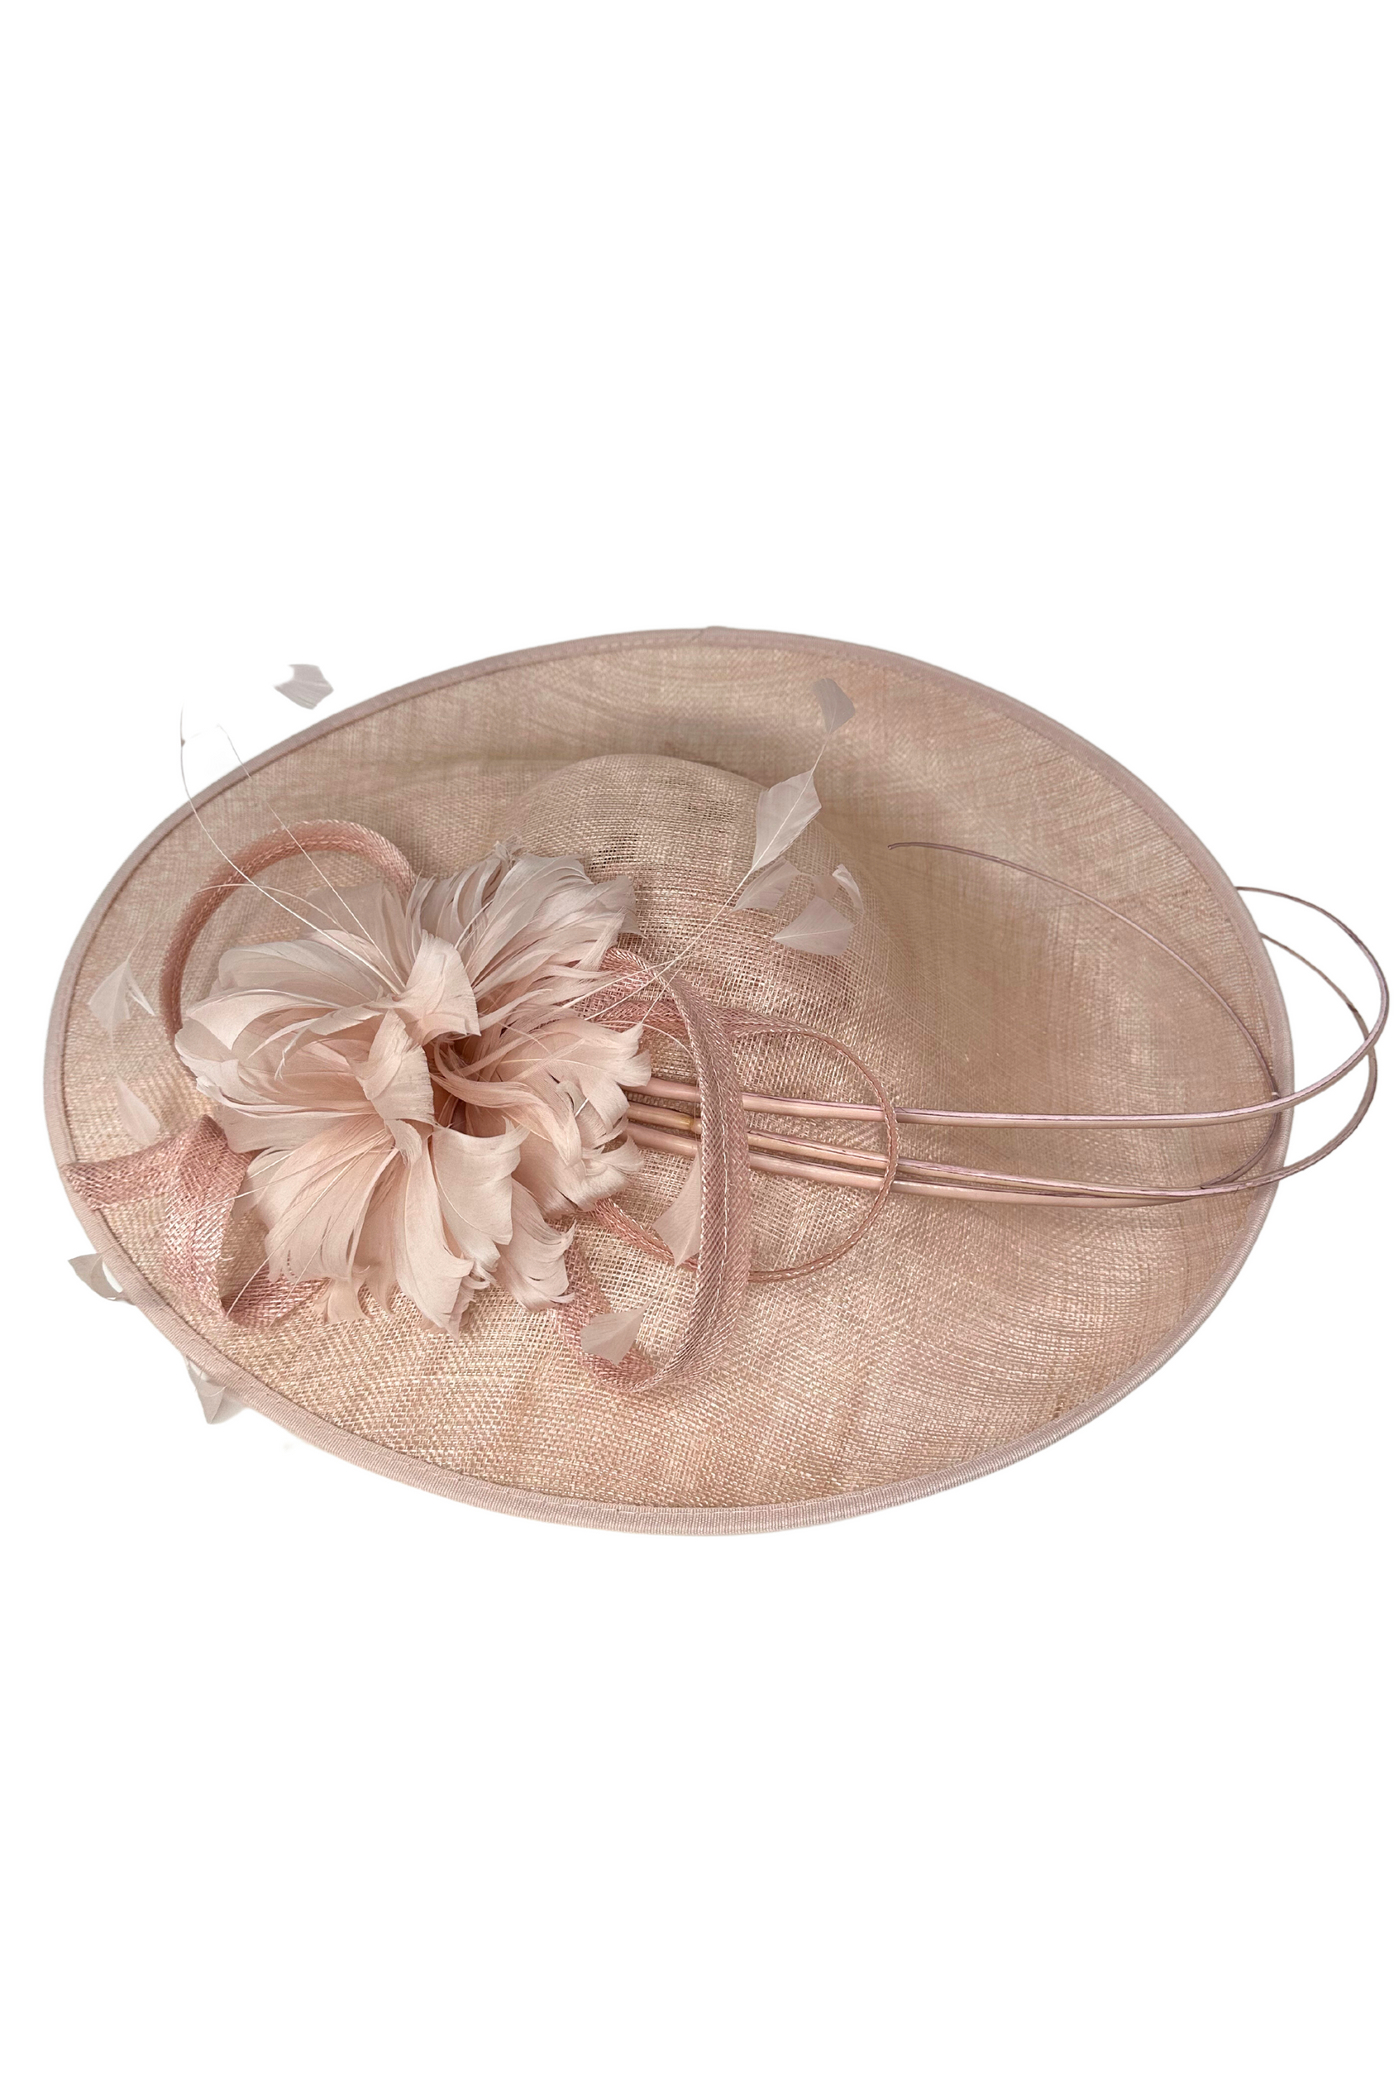 Blush Pink And Ivory Fascinator Hat Headpiece With Mesh Detail